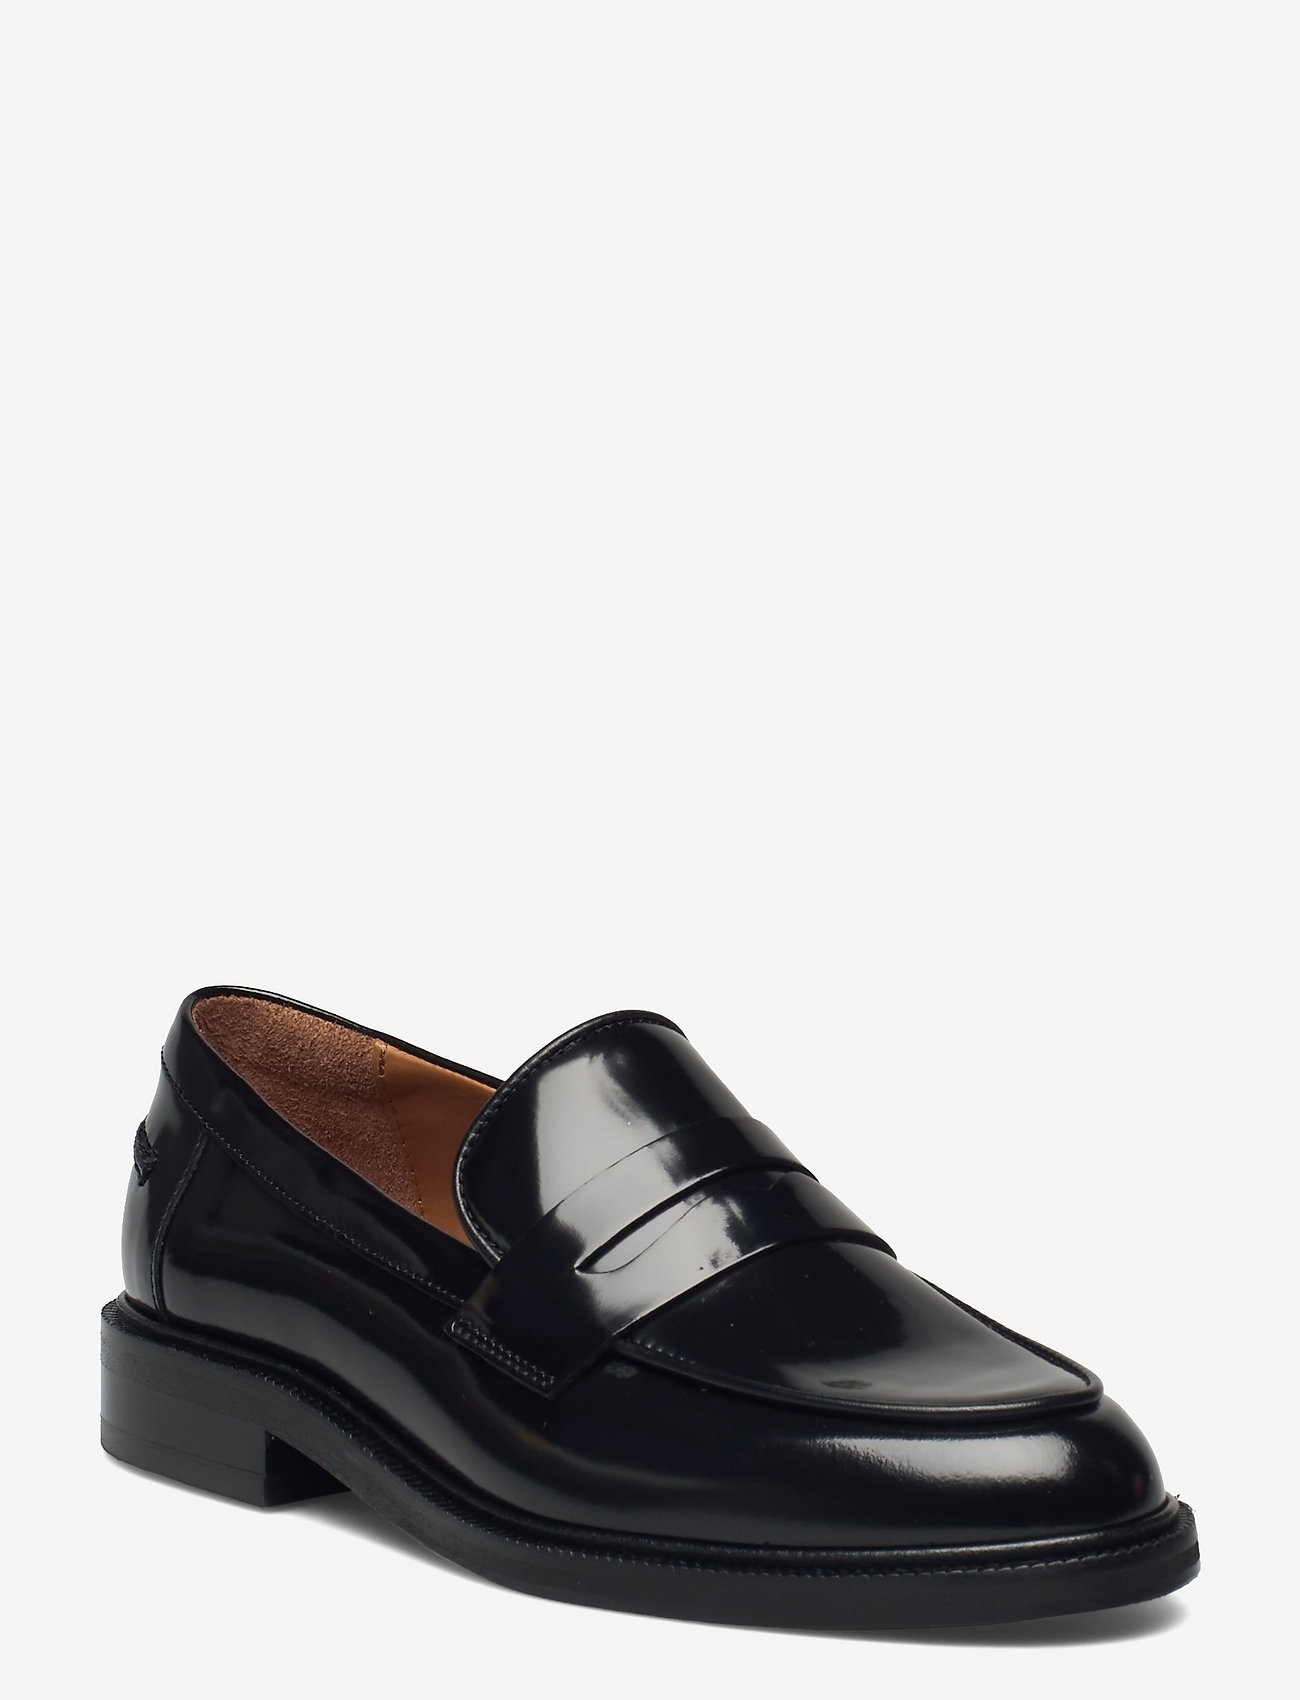 boozt.com | Shoes A1361 - Loafers